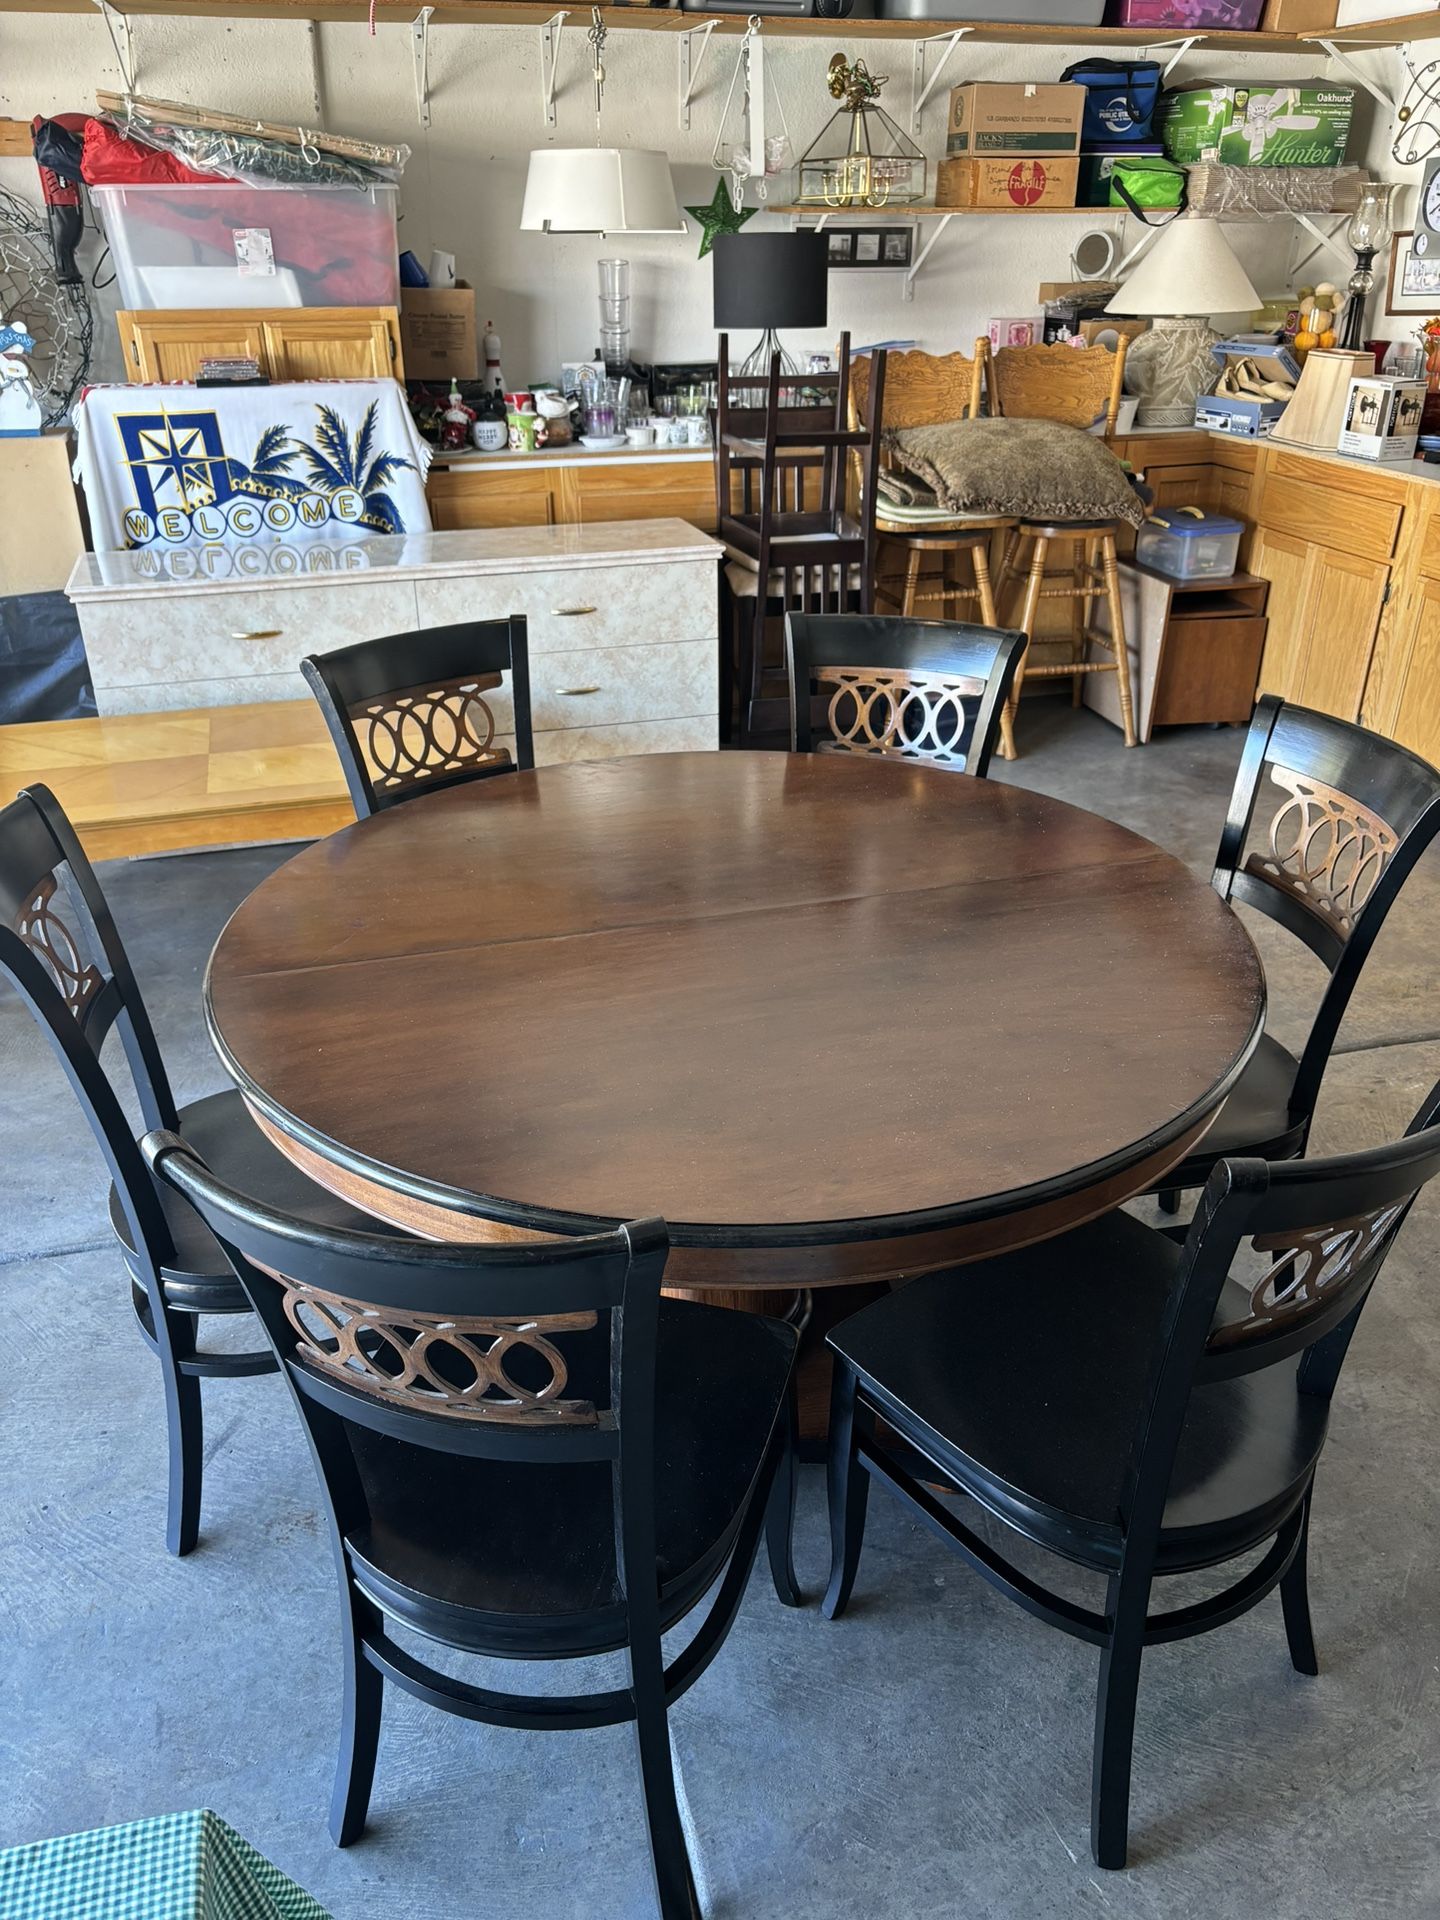 Vintage Round Table With 6 Chairs And A Leaf To Make It Longer And Oblong, Made In Italy , Real Solid Wood